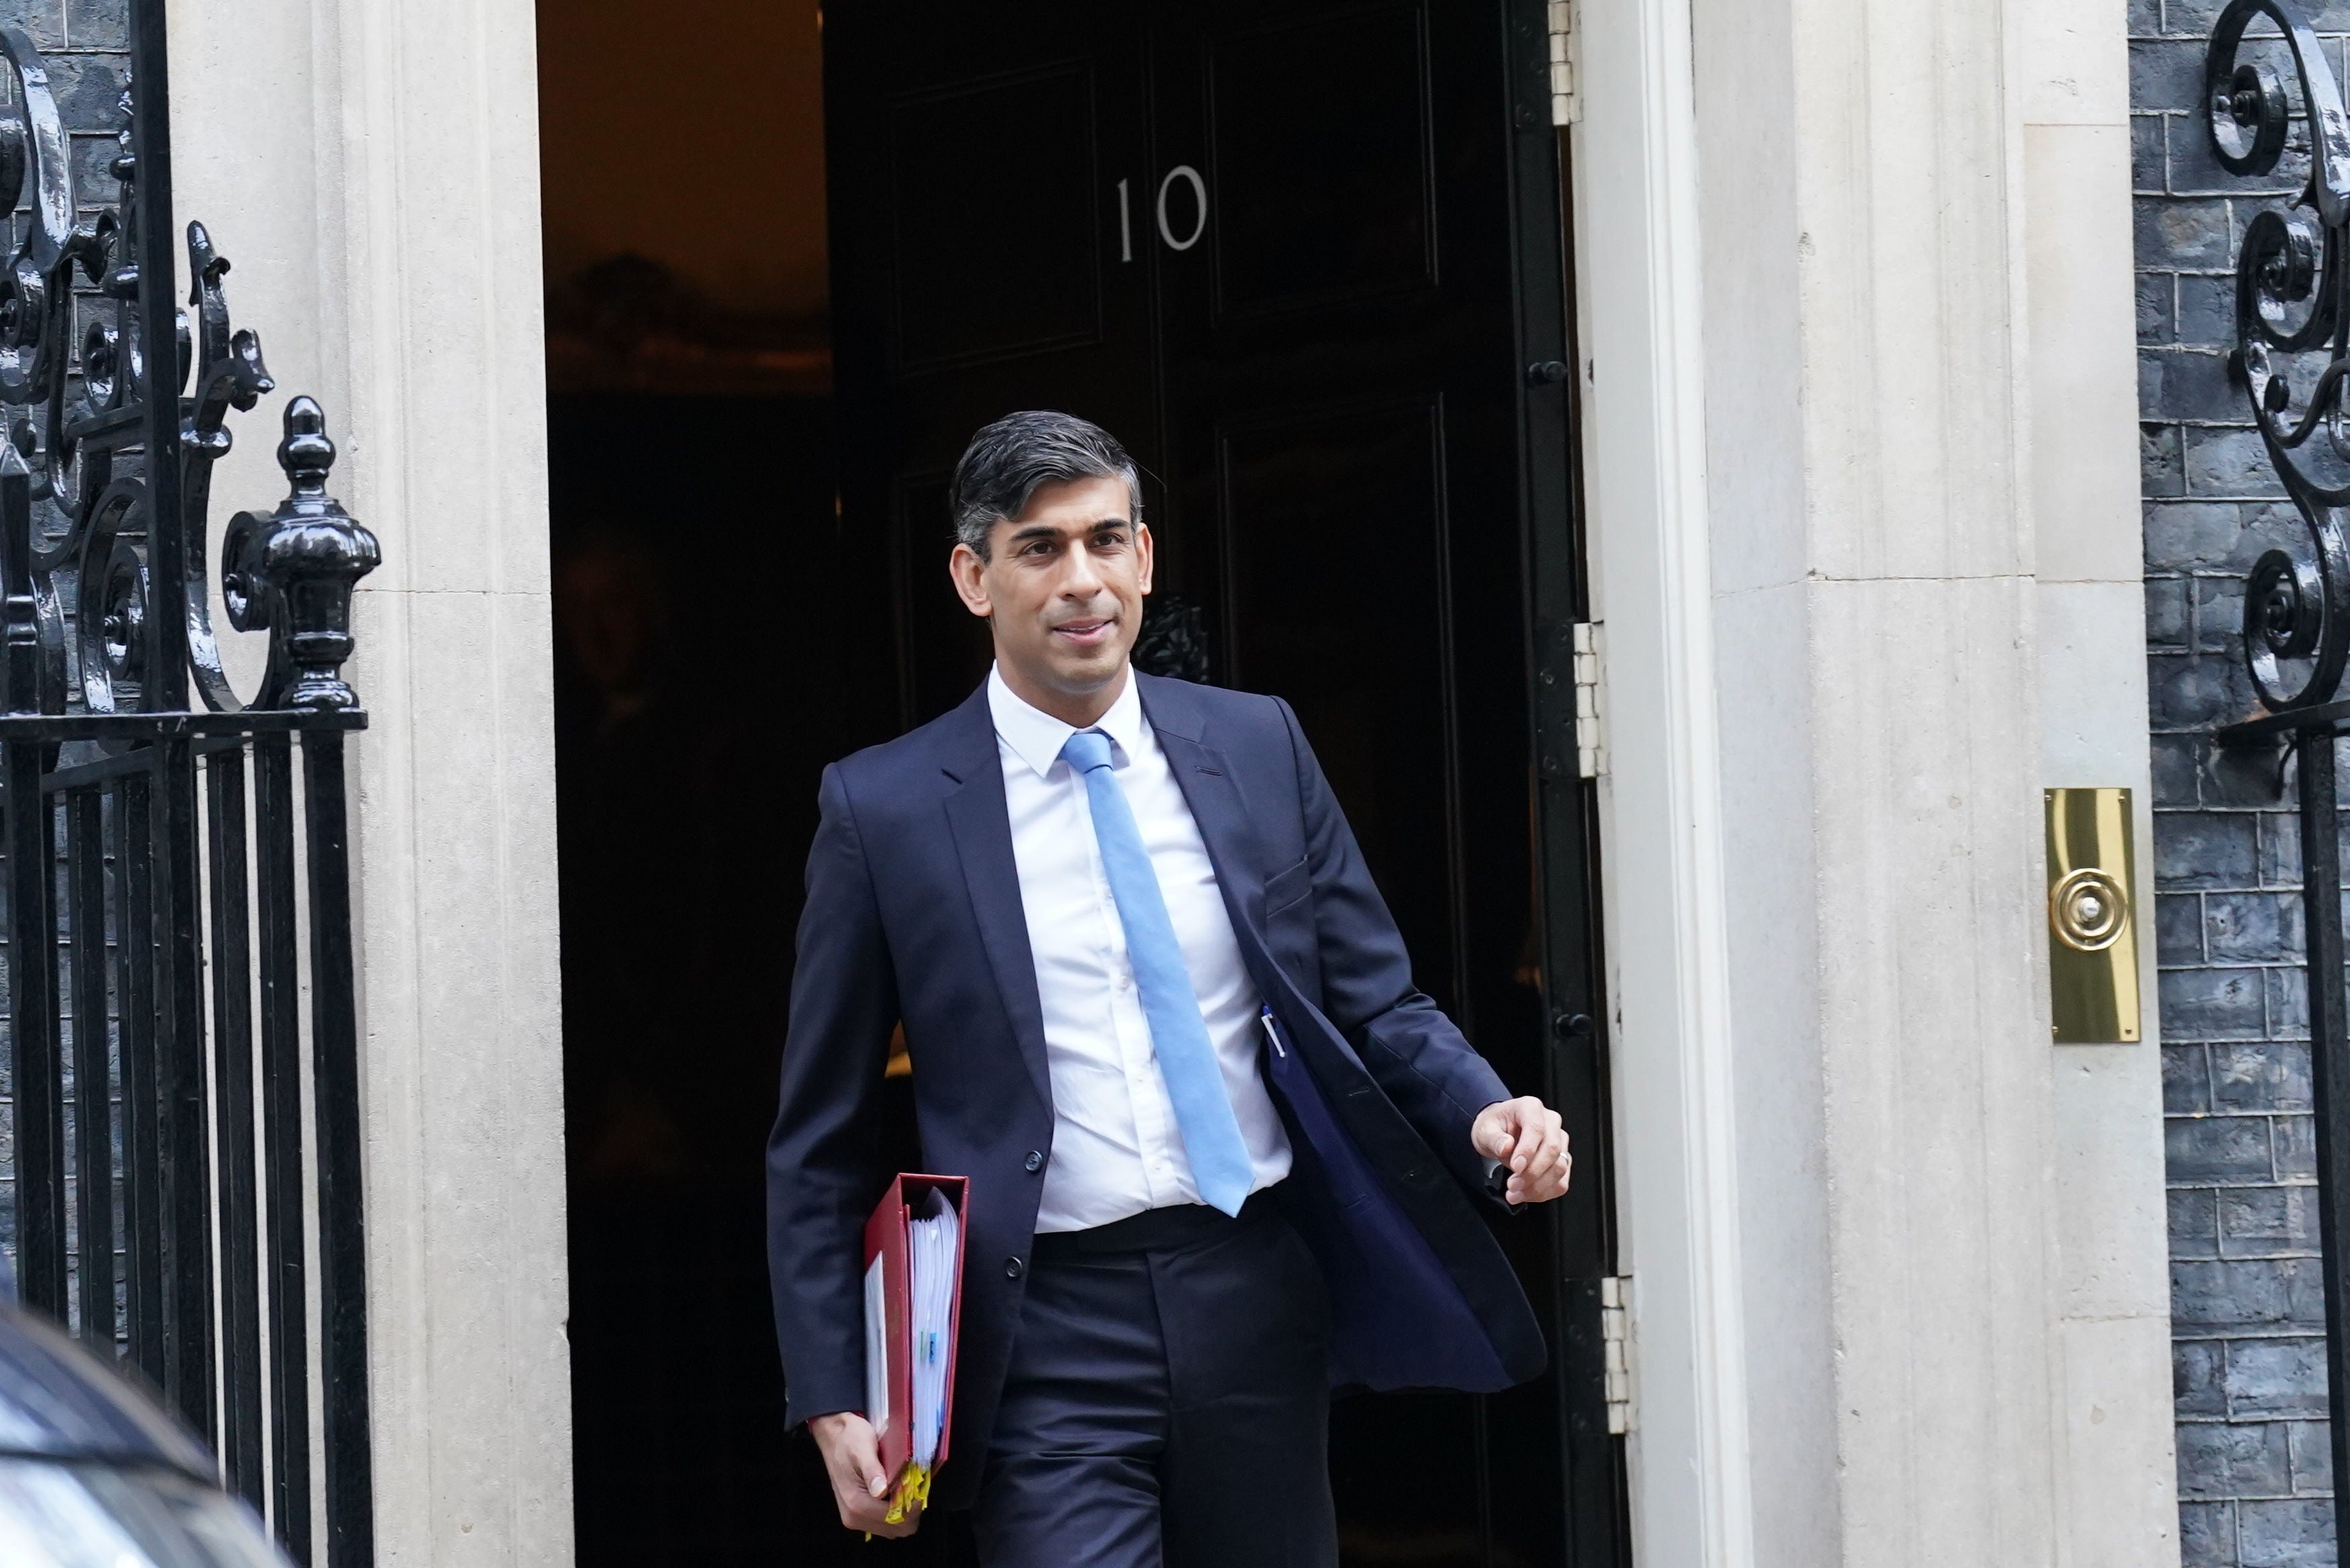 A plot to oust Rishi Sunak as Tory leader has only strengthened his hold on office